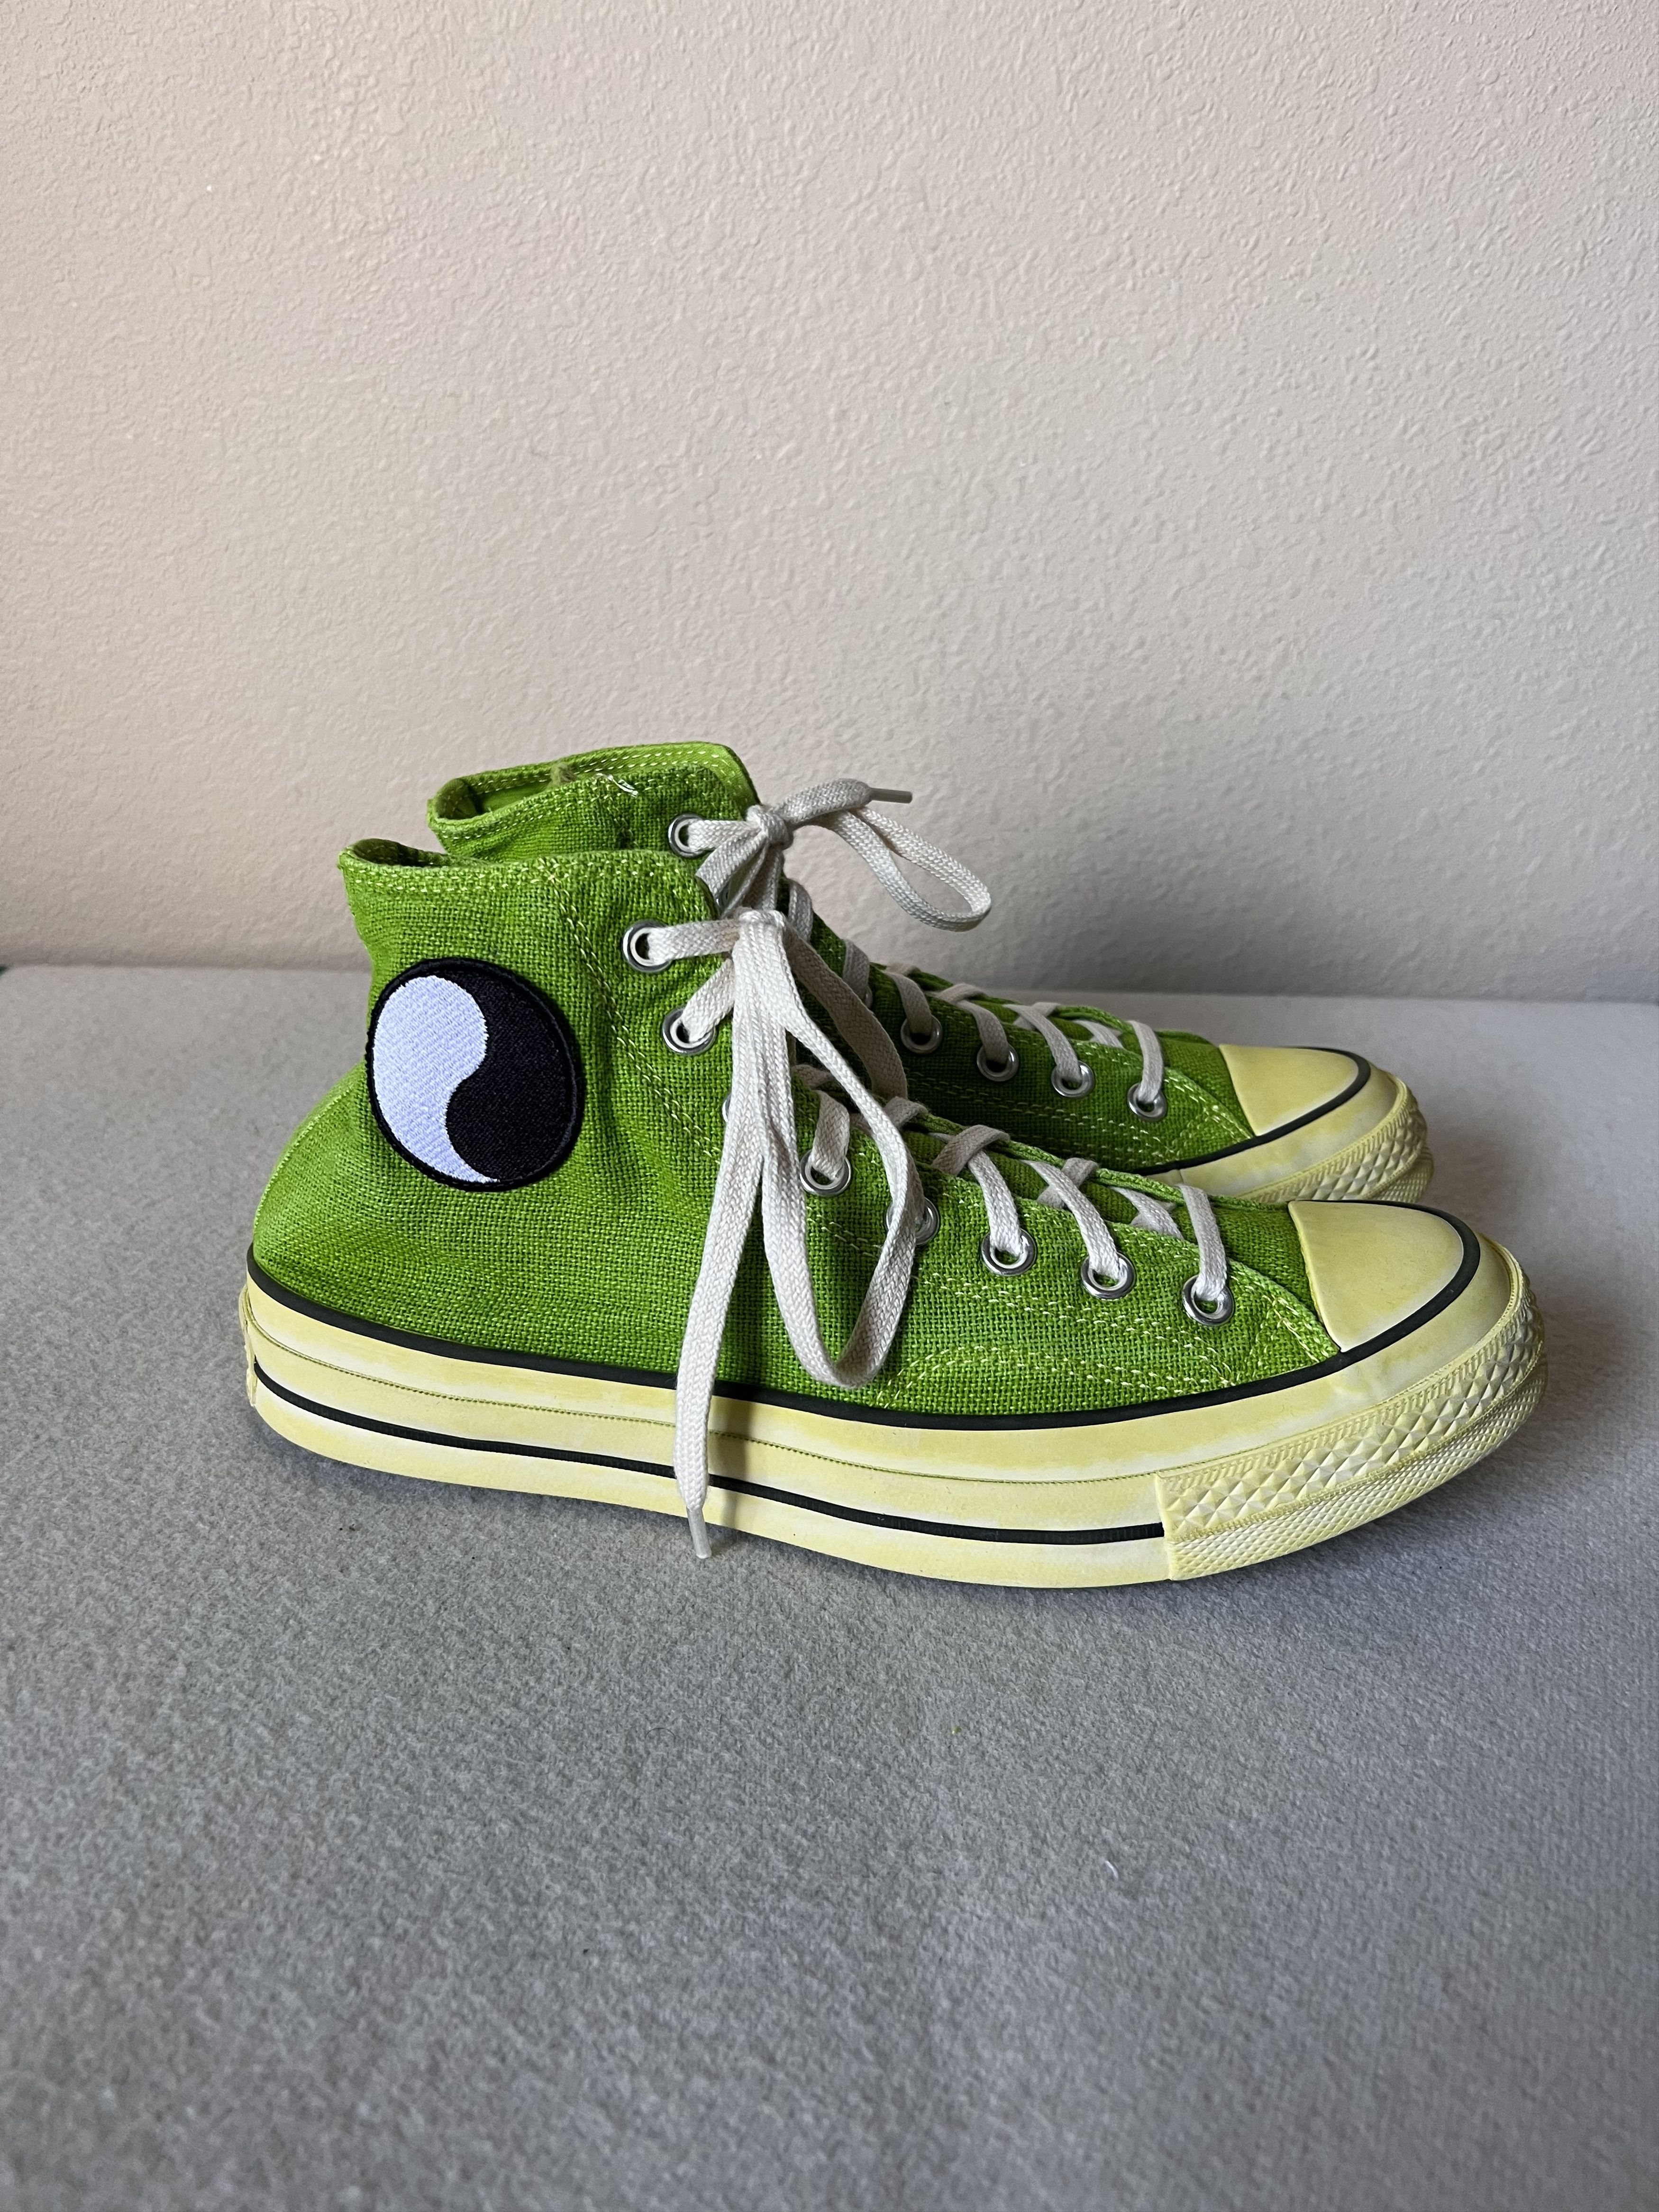 Our Legacy Our Legacy Stussy Converse Chuck 70 Hi in Lizard Green